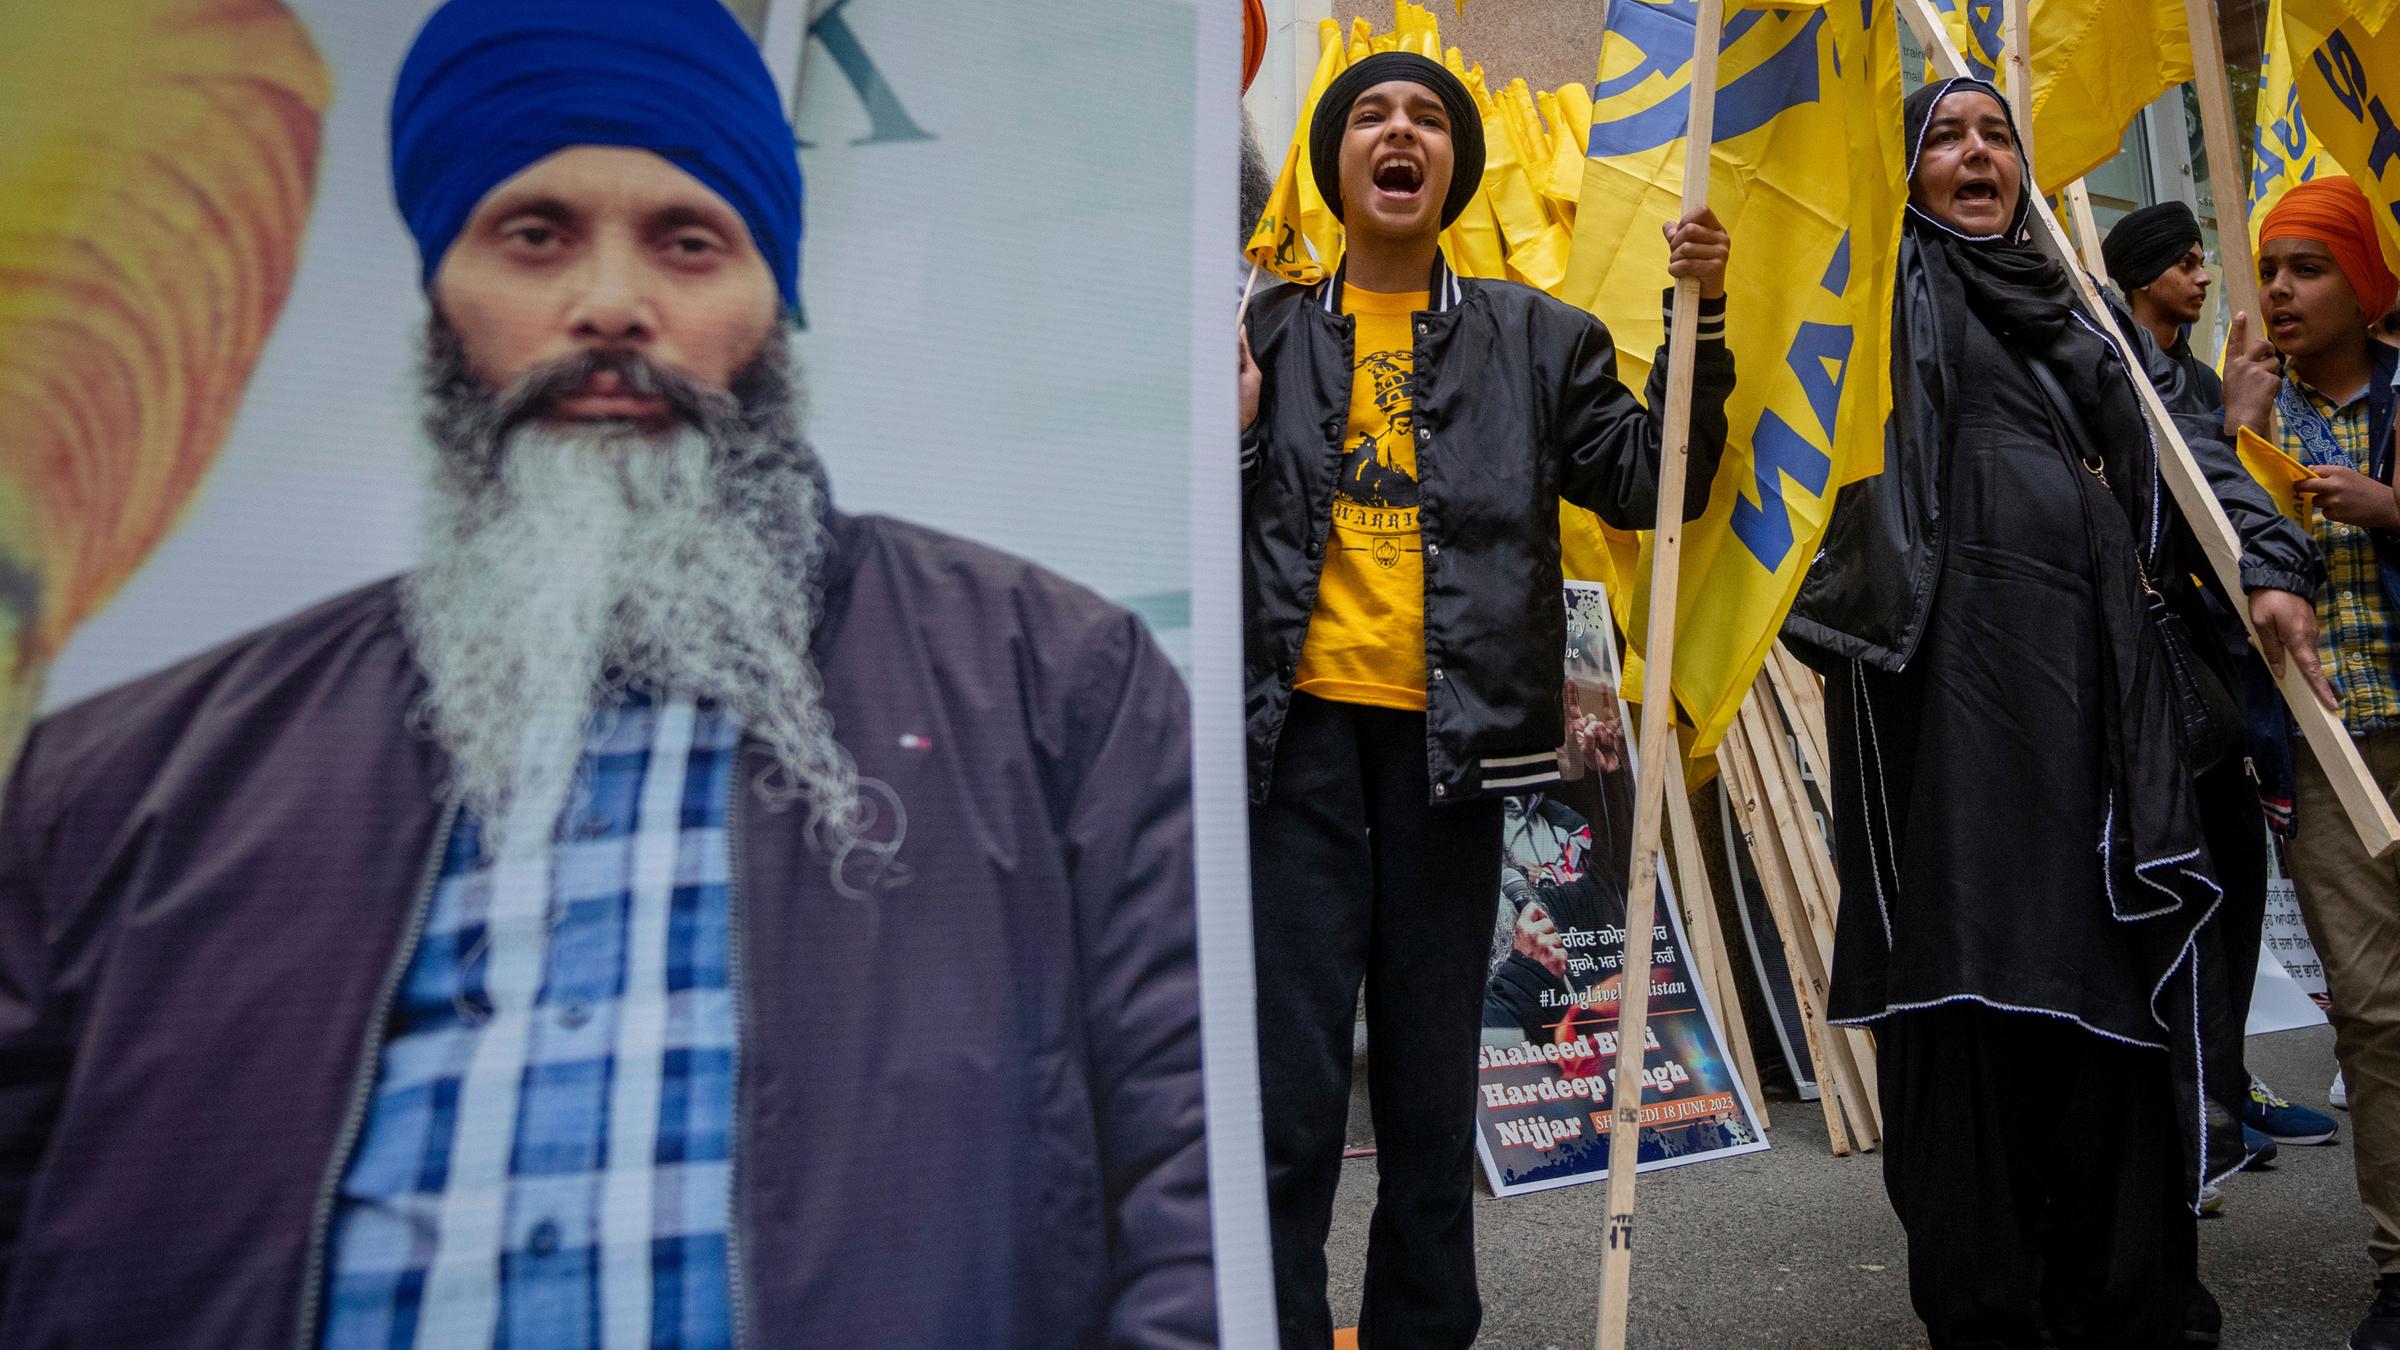 A large poster features a portrait of Hardeep Singh Nijjar, while several people protest in the background.